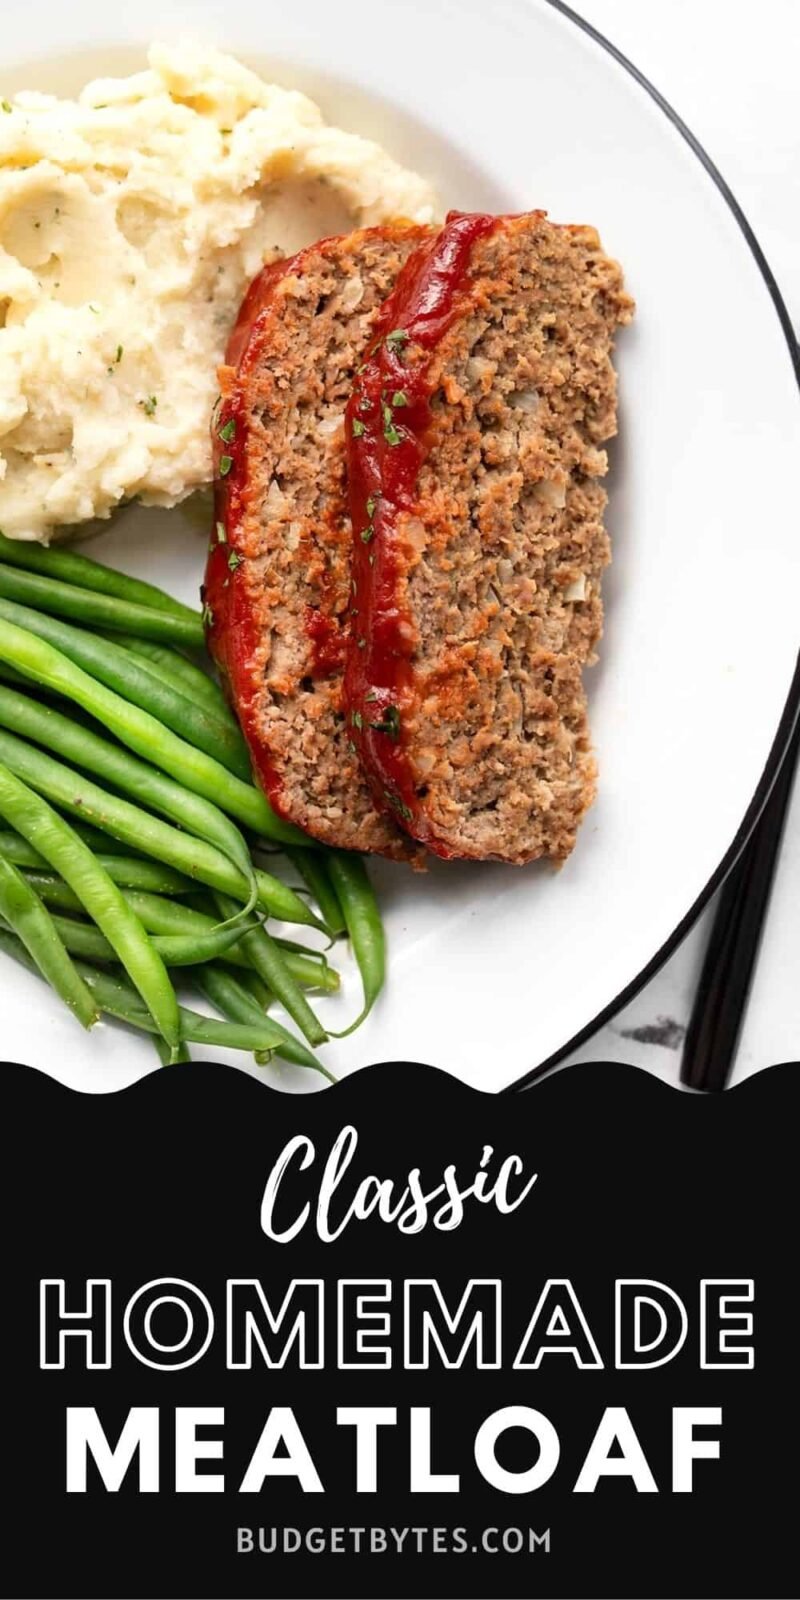 Two slices of meatloaf on a plate with green beans and mashed potatoes, title text at the bottom.